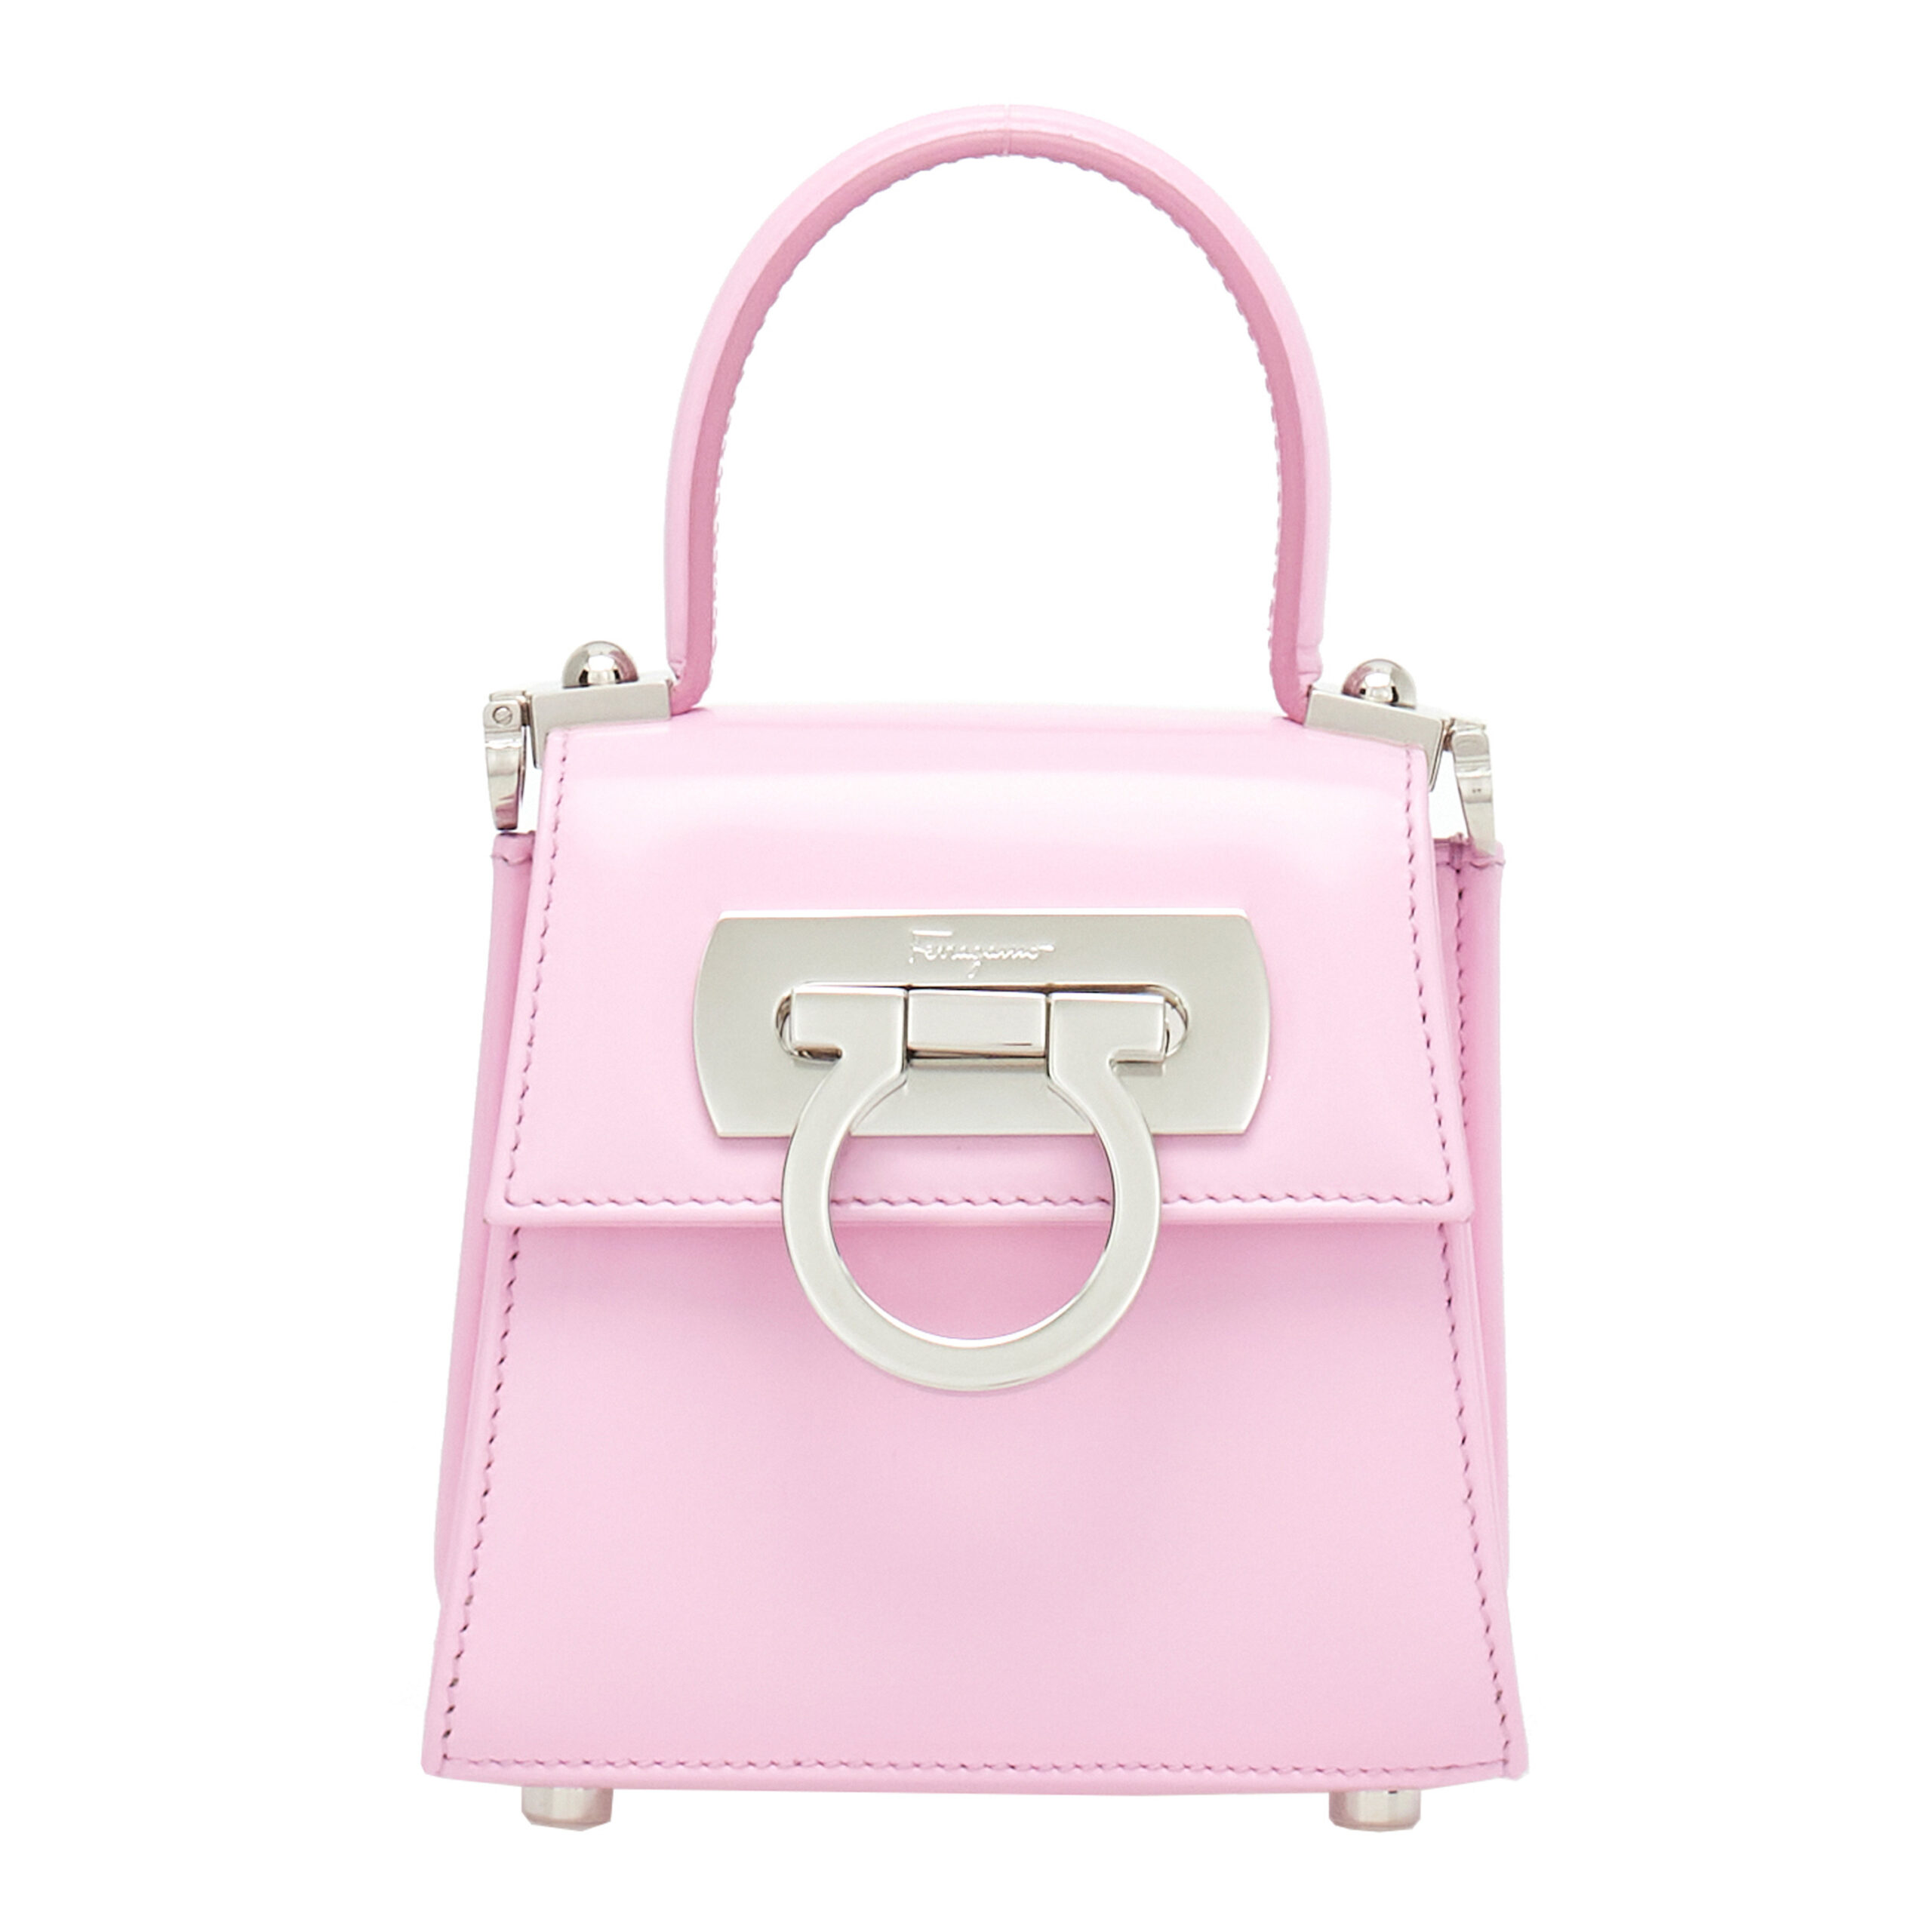 Ferragamo Goes Miniature With New Range Of Mini Bags From Pre-Fall